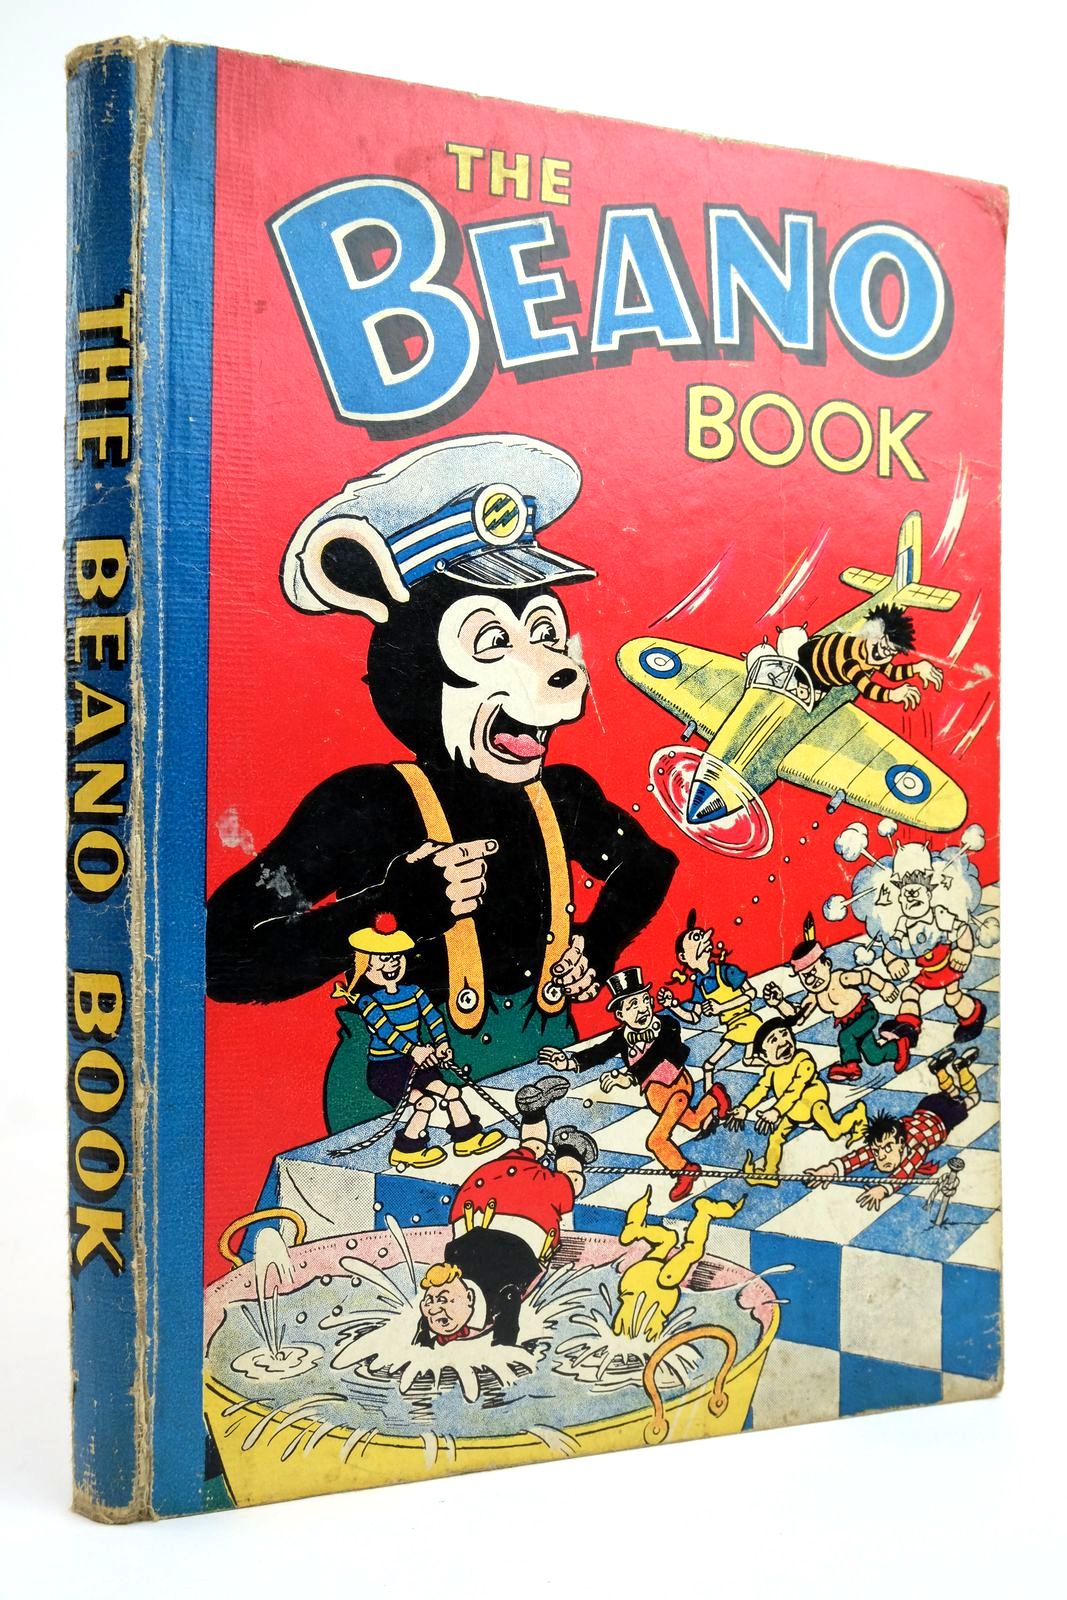 Photo of THE BEANO BOOK 1956- Stock Number: 2135414